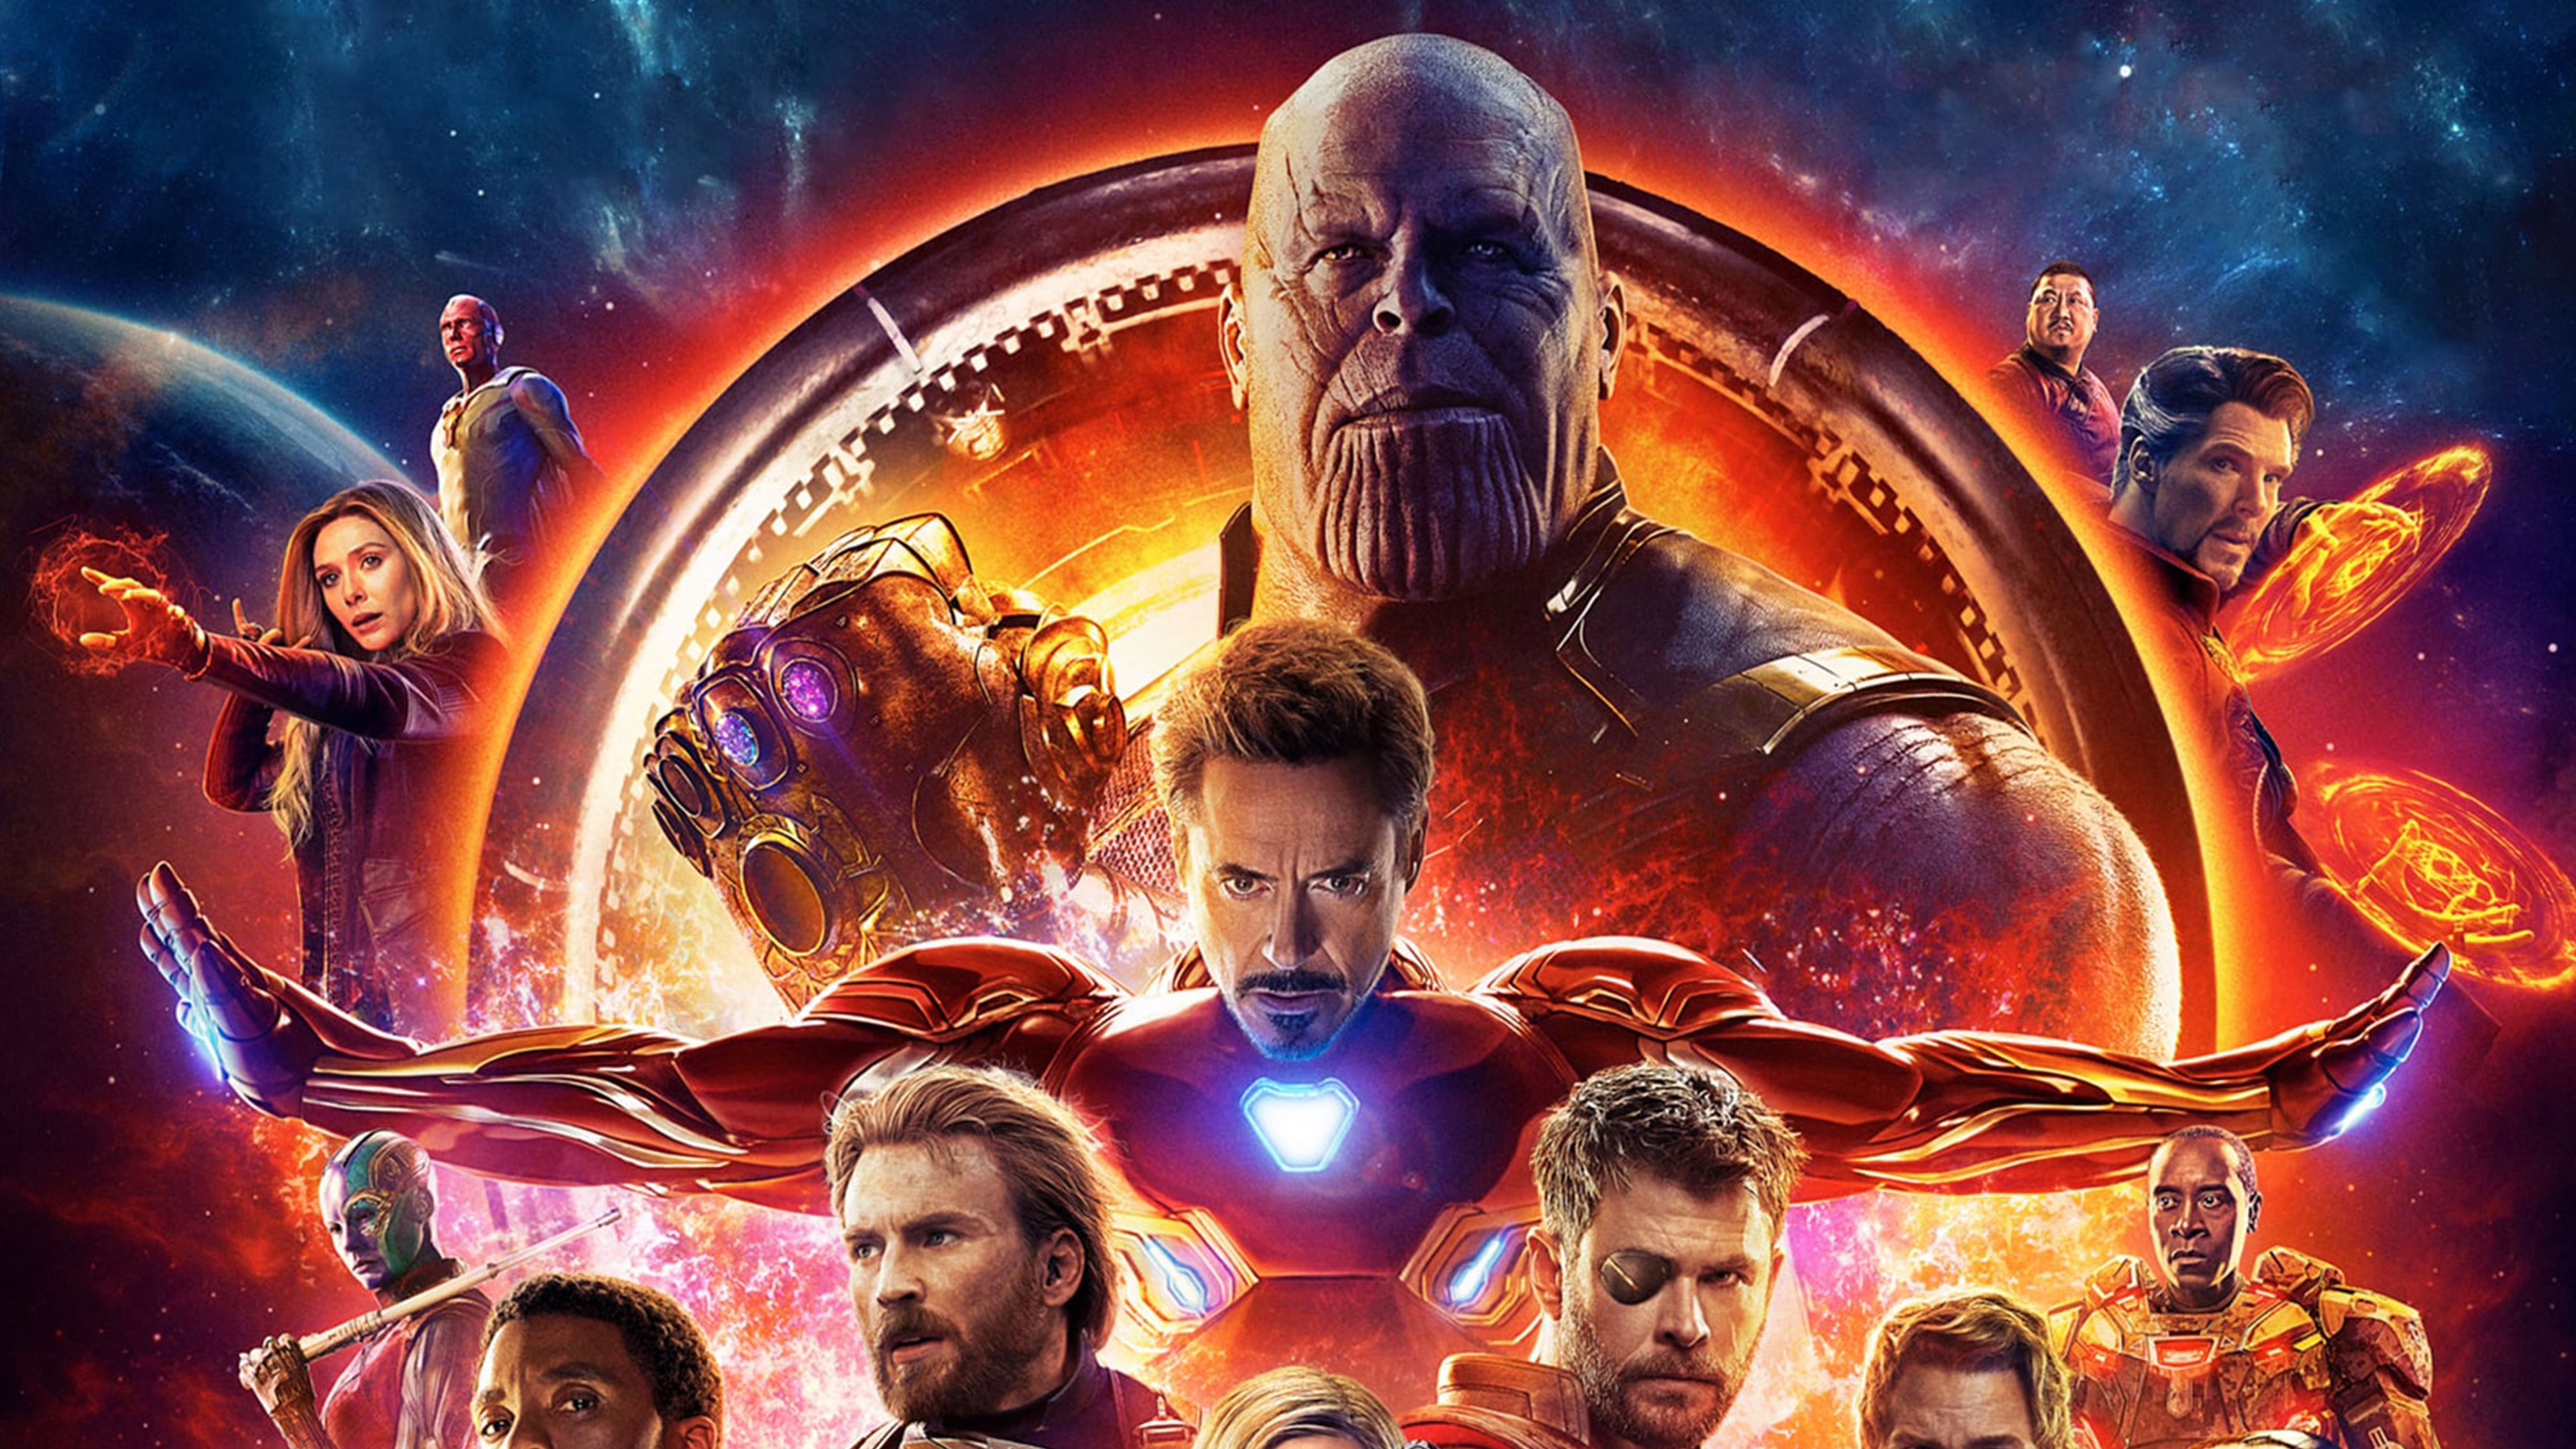 1680x1050 Avengers Infinity War 2018 4k Poster 1680x1050 Resolution HD 4k Wallpapers, Image, Backgrounds, Photos and Pictures